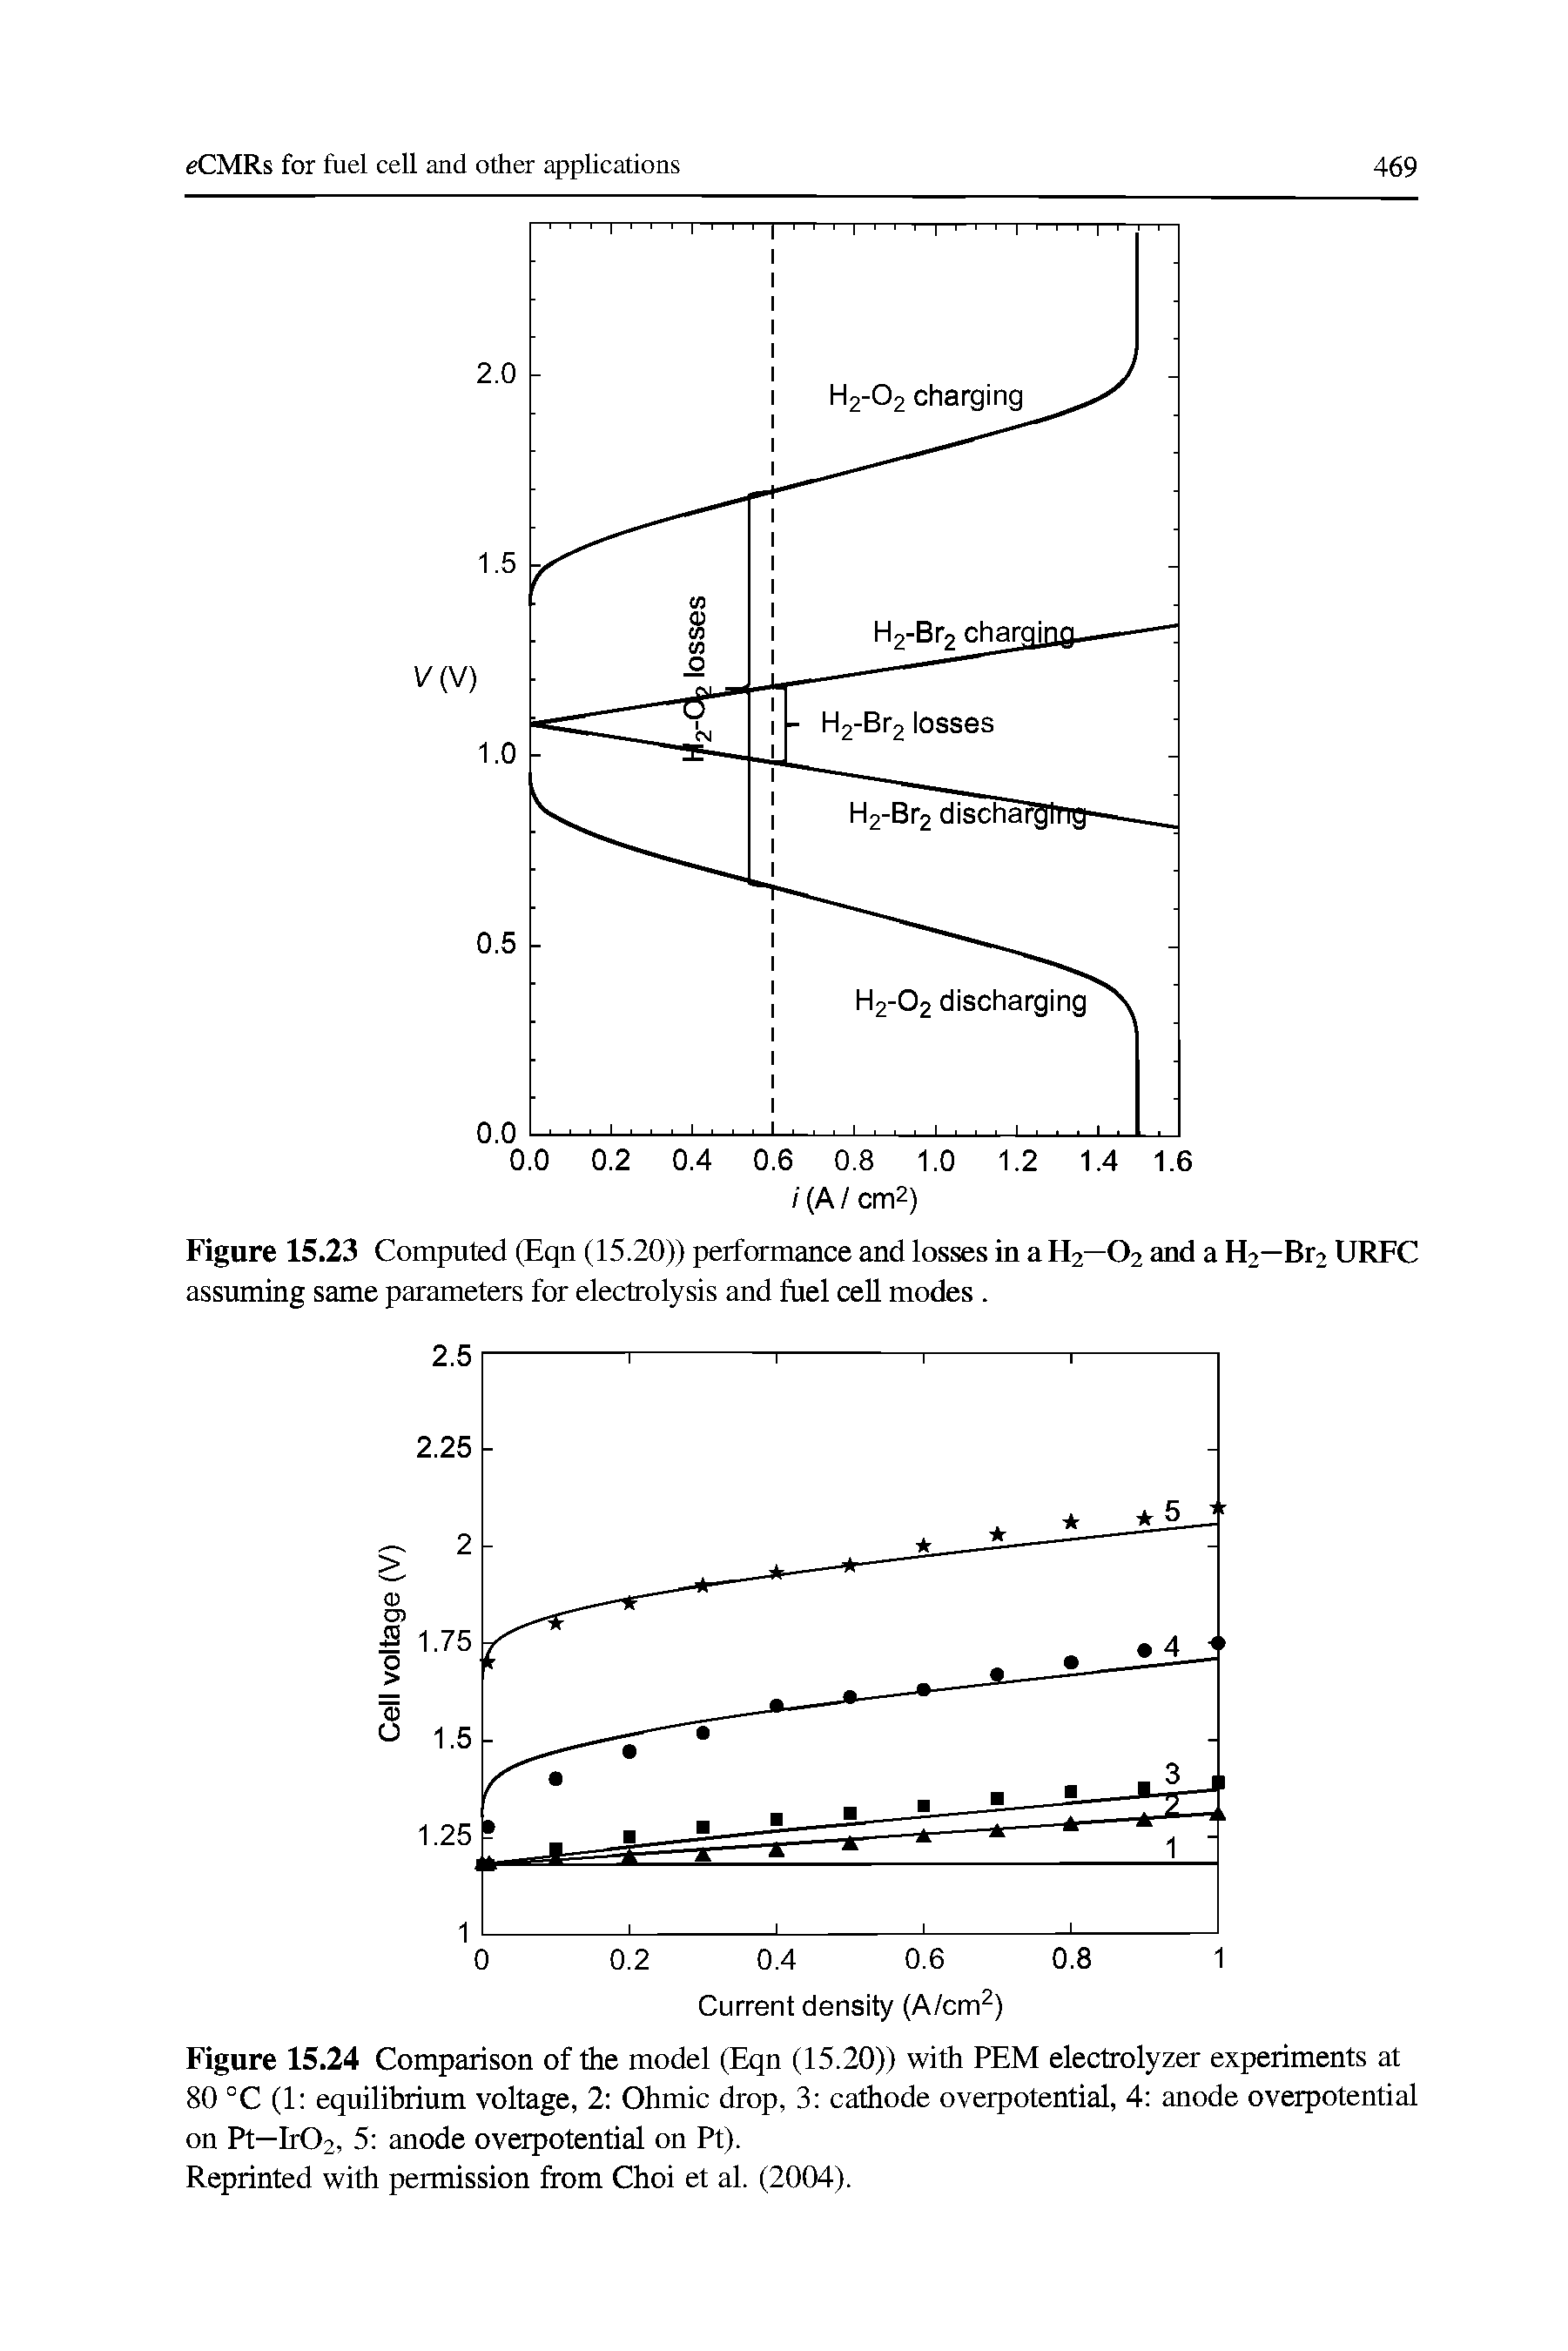 Figure 15.23 Computed (Eqn (15.20)) performance and losses in a H2—O2 and a H2—Br2 URFC assuming same parameters for electrolysis and fuel cell modes. ...